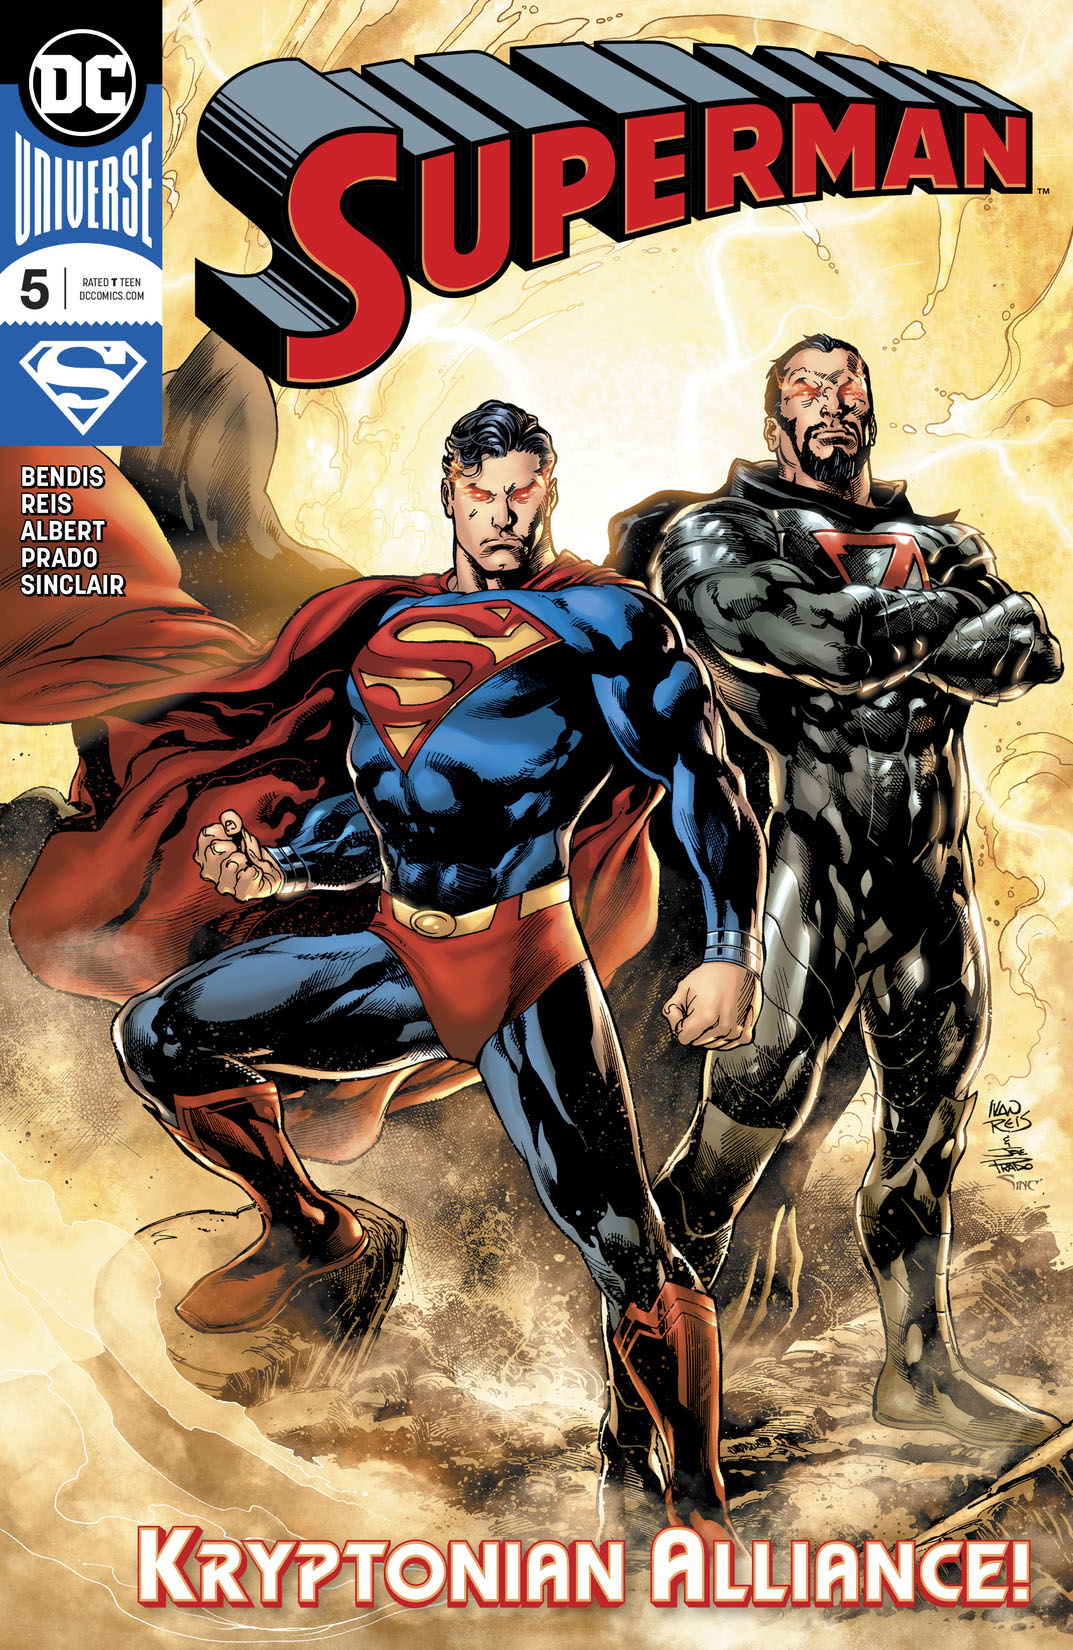 Superman (2018-) #5 preview images